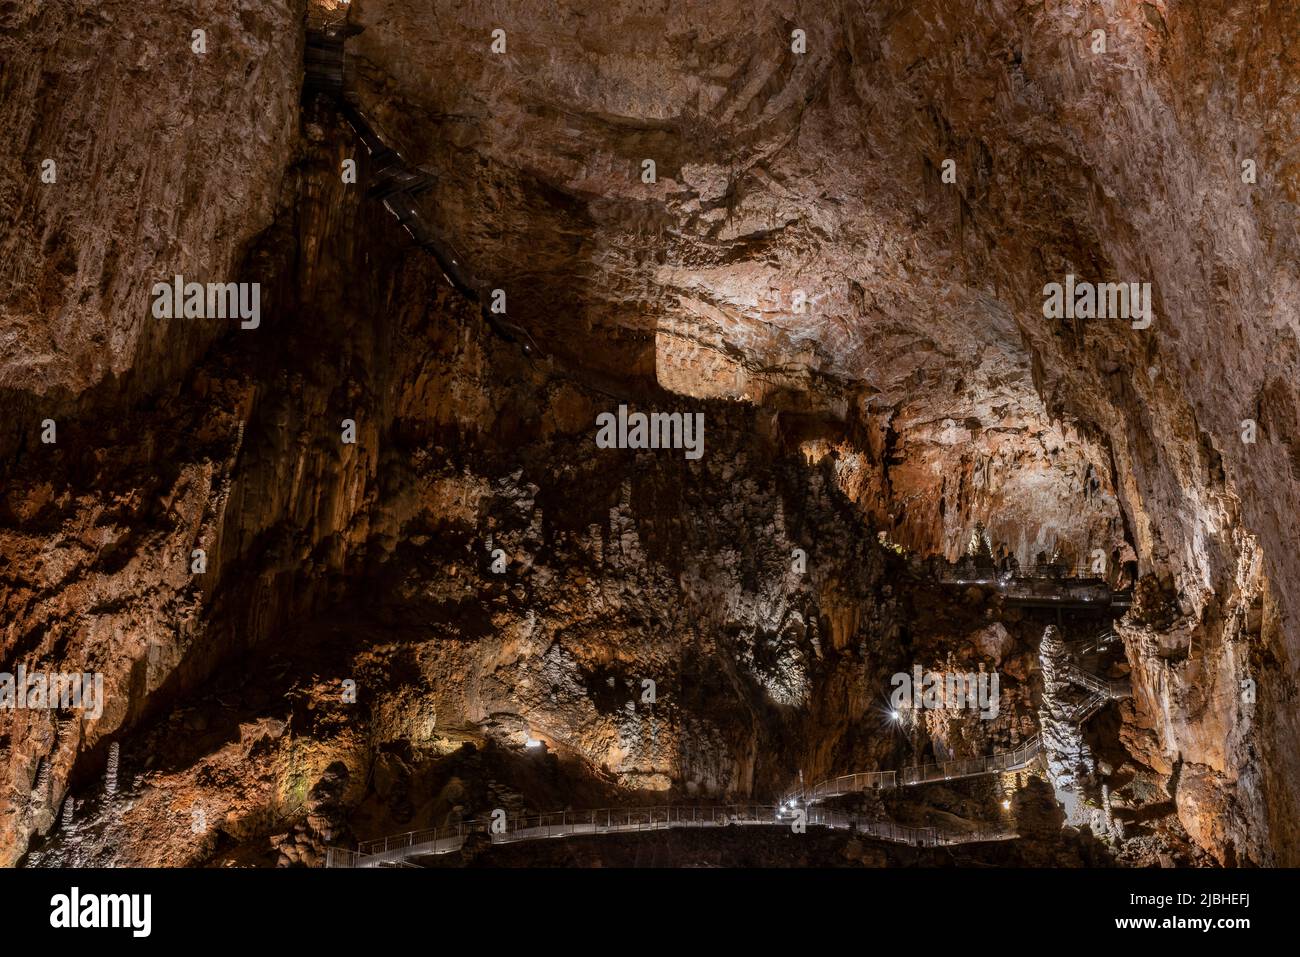 The Grotta Gigante is a giant cave on the Italian side of the Trieste Karst (Carso). Its central cavern is the second world's largest show cave. Stock Photo